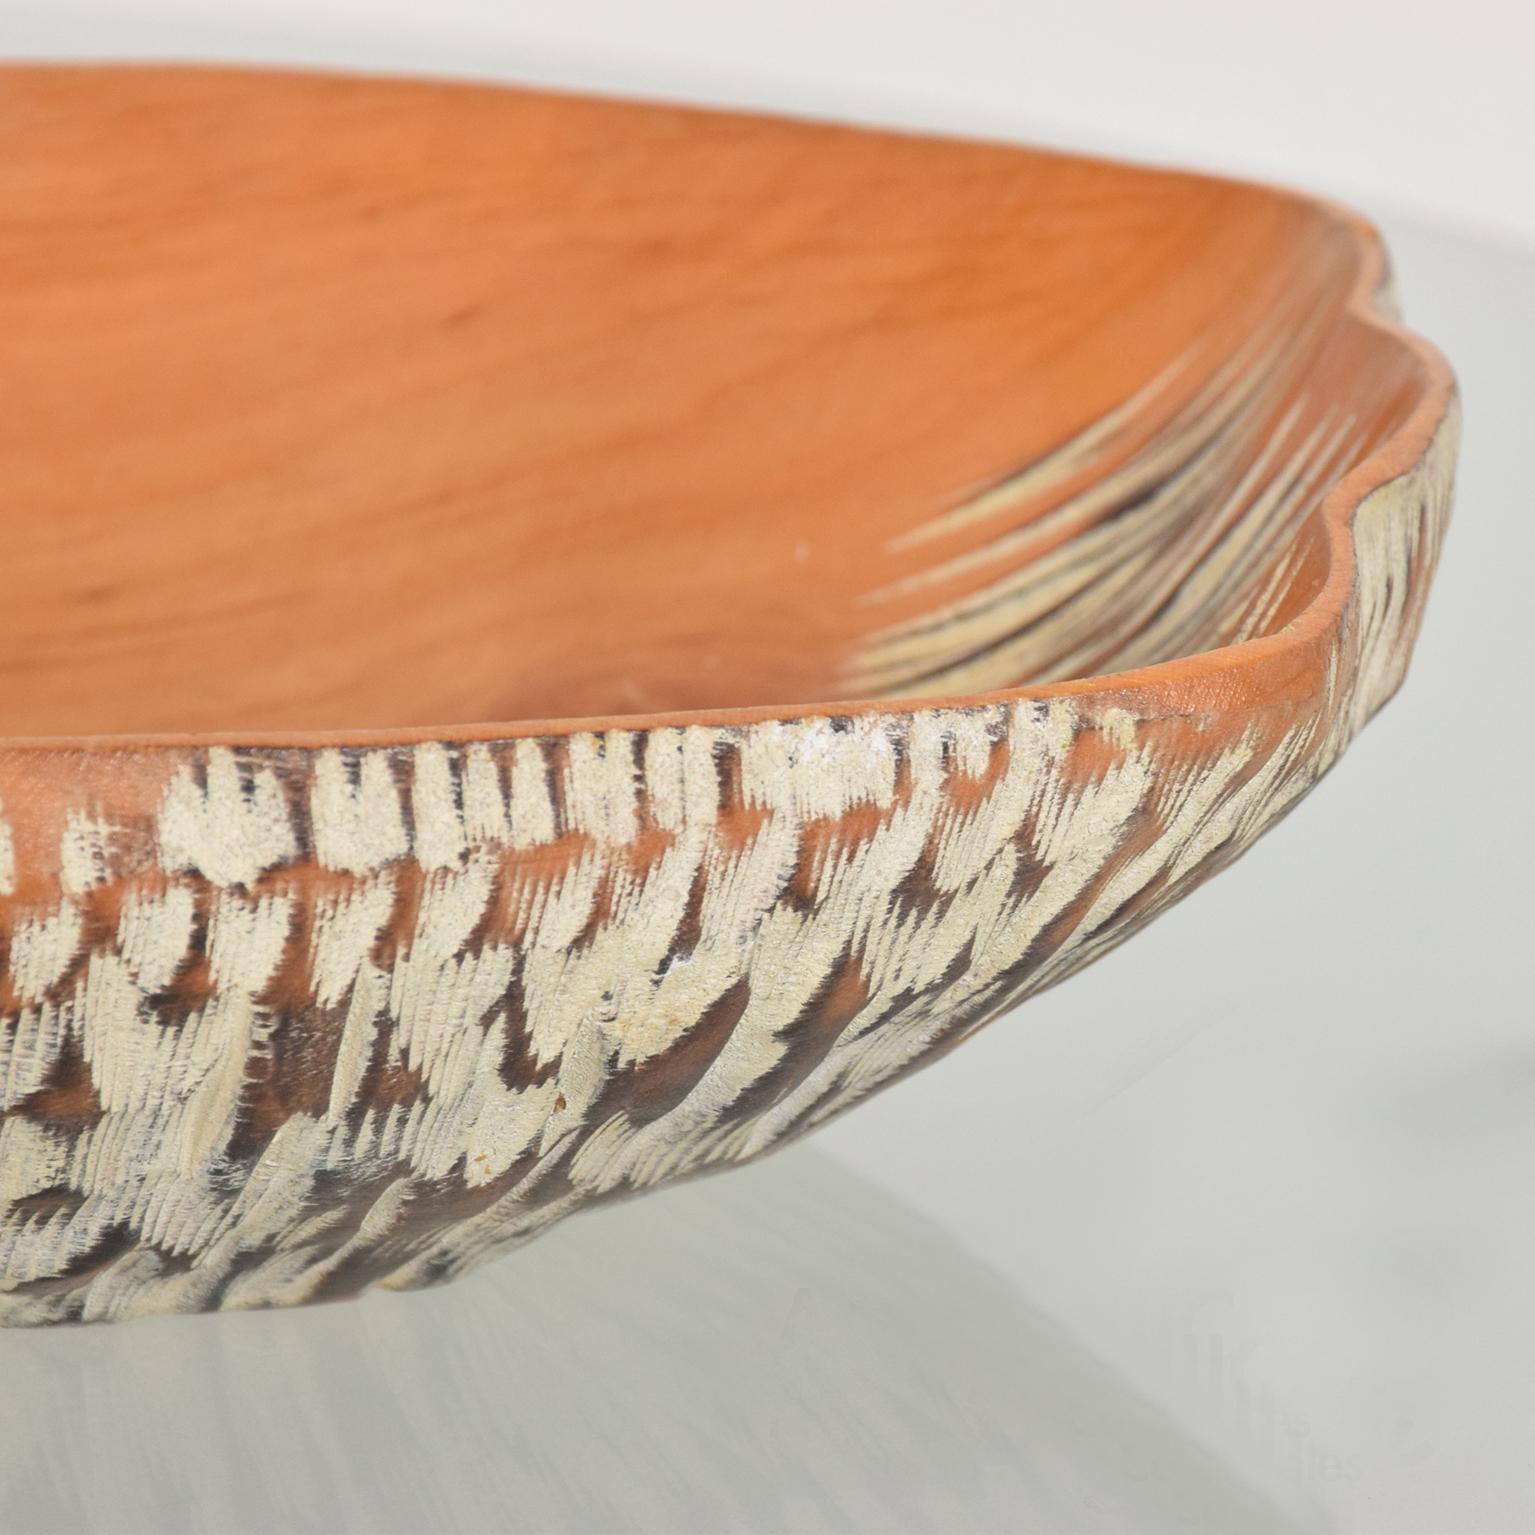 1960s Macabo Cusano Aldo Tura Carved Wood Serving Dish Milan Italy For Sale 1